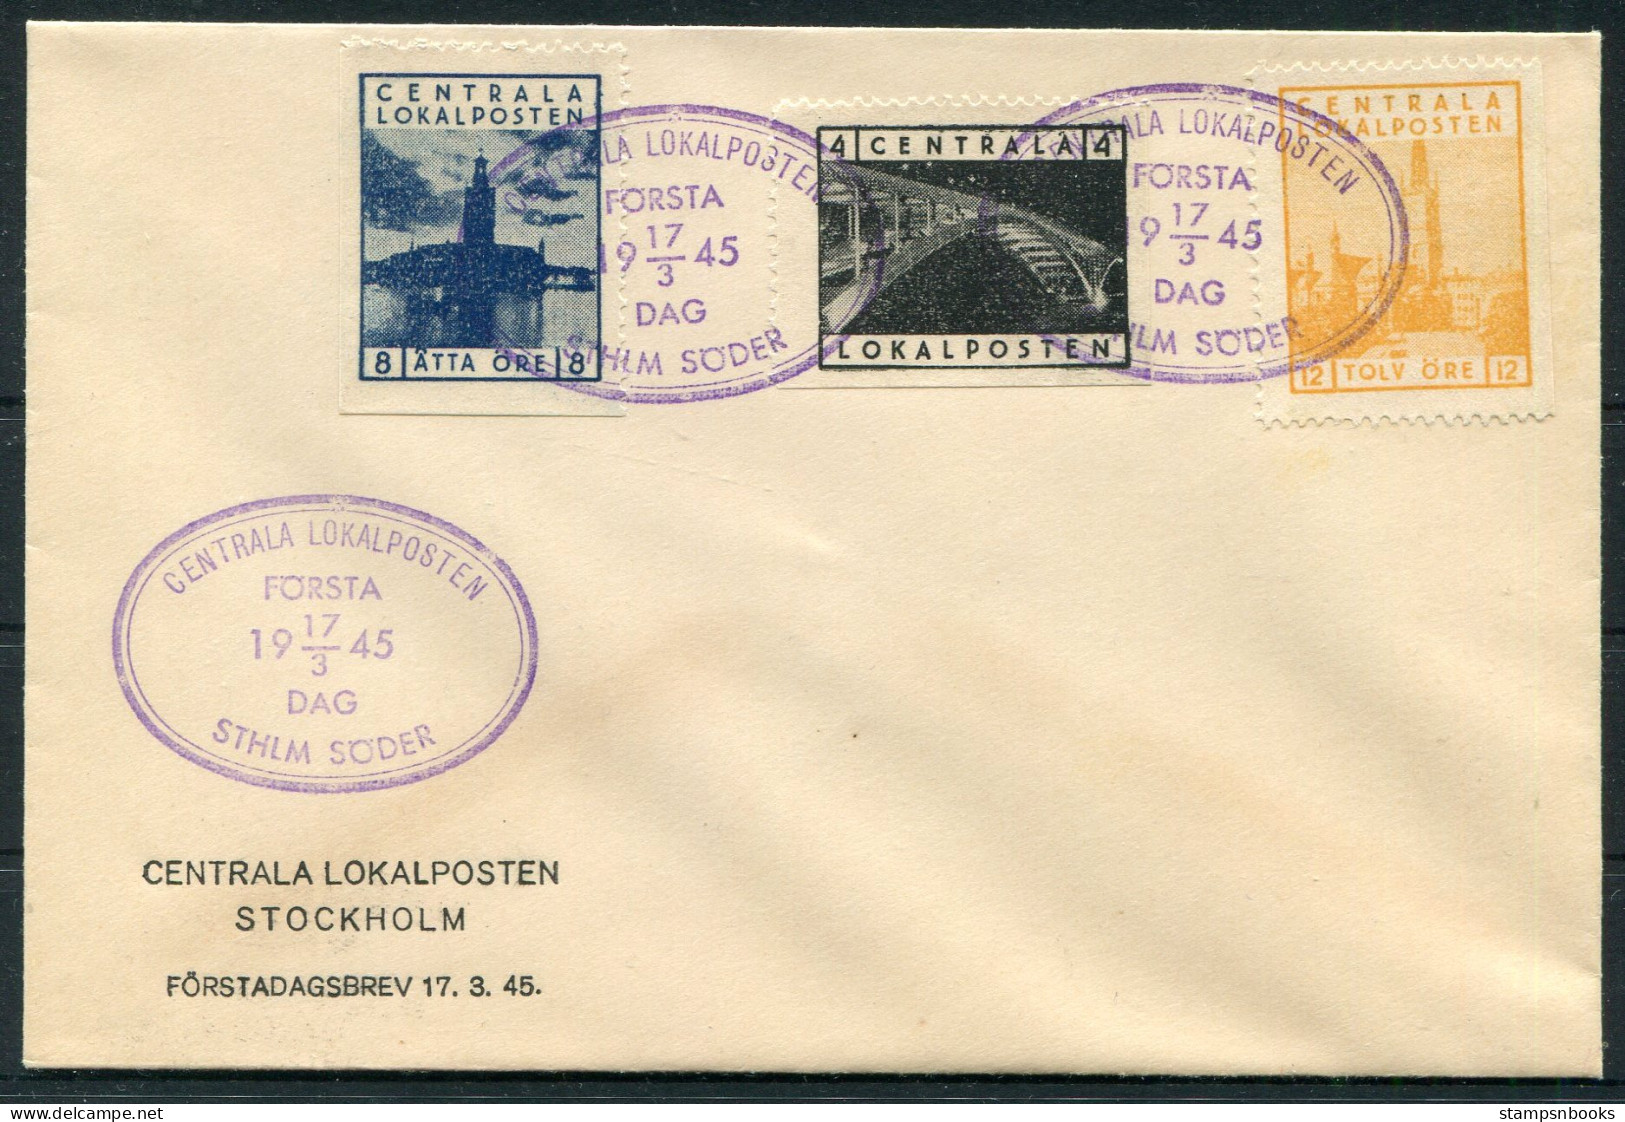 1945 Sweden Stockholm Centrala Lokalposten First Day Cover, Local Post FDC - Emissions Locales